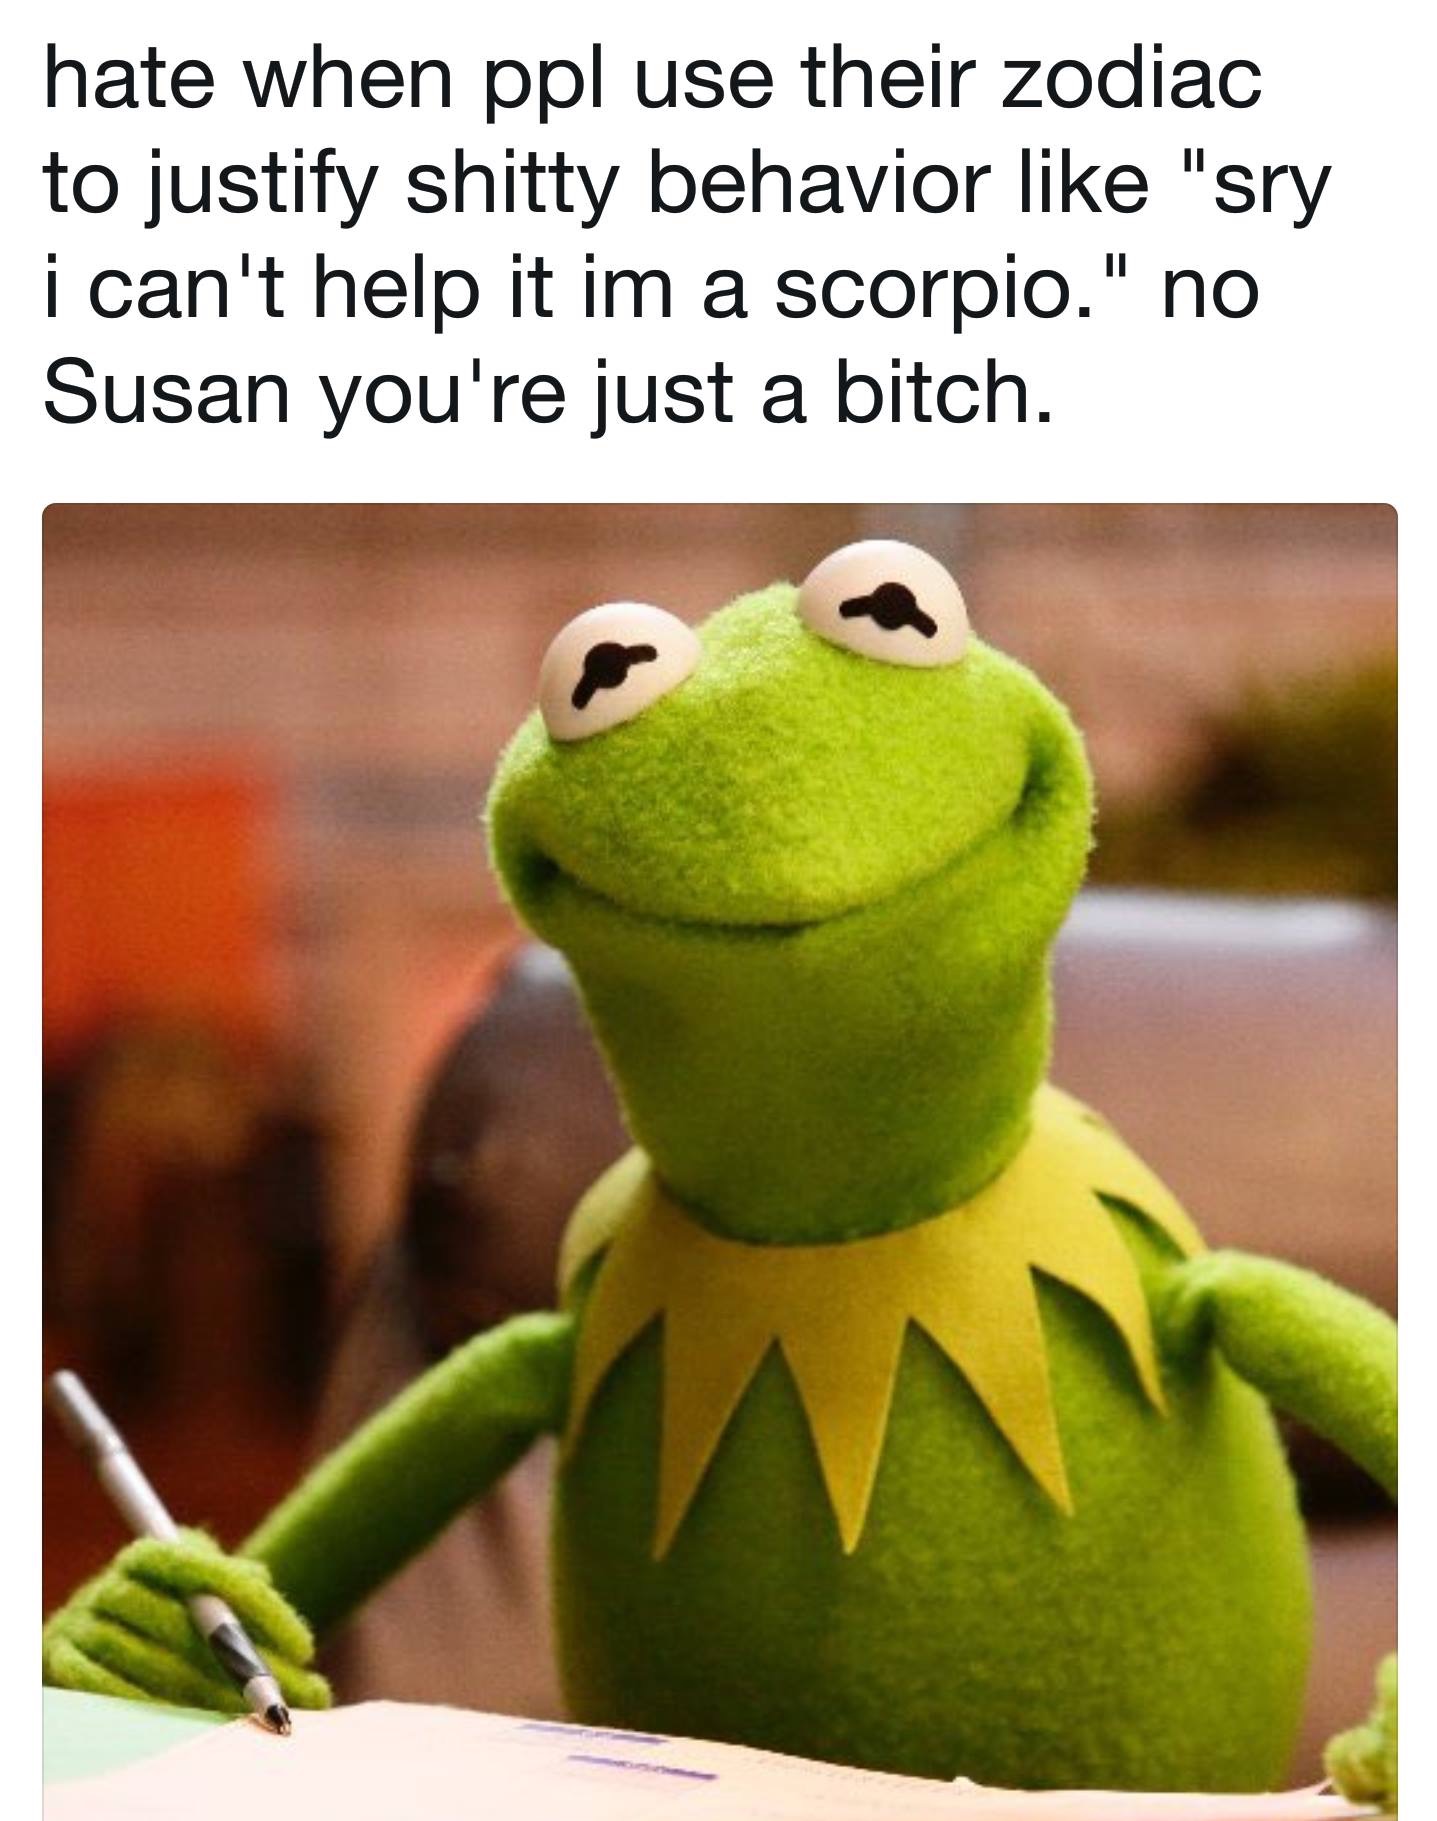 susan kermit the frog meme - hate when ppl use their zodiac to justify shitty behavior "sry i can't help it im a scorpio." no Susan you're just a bitch.